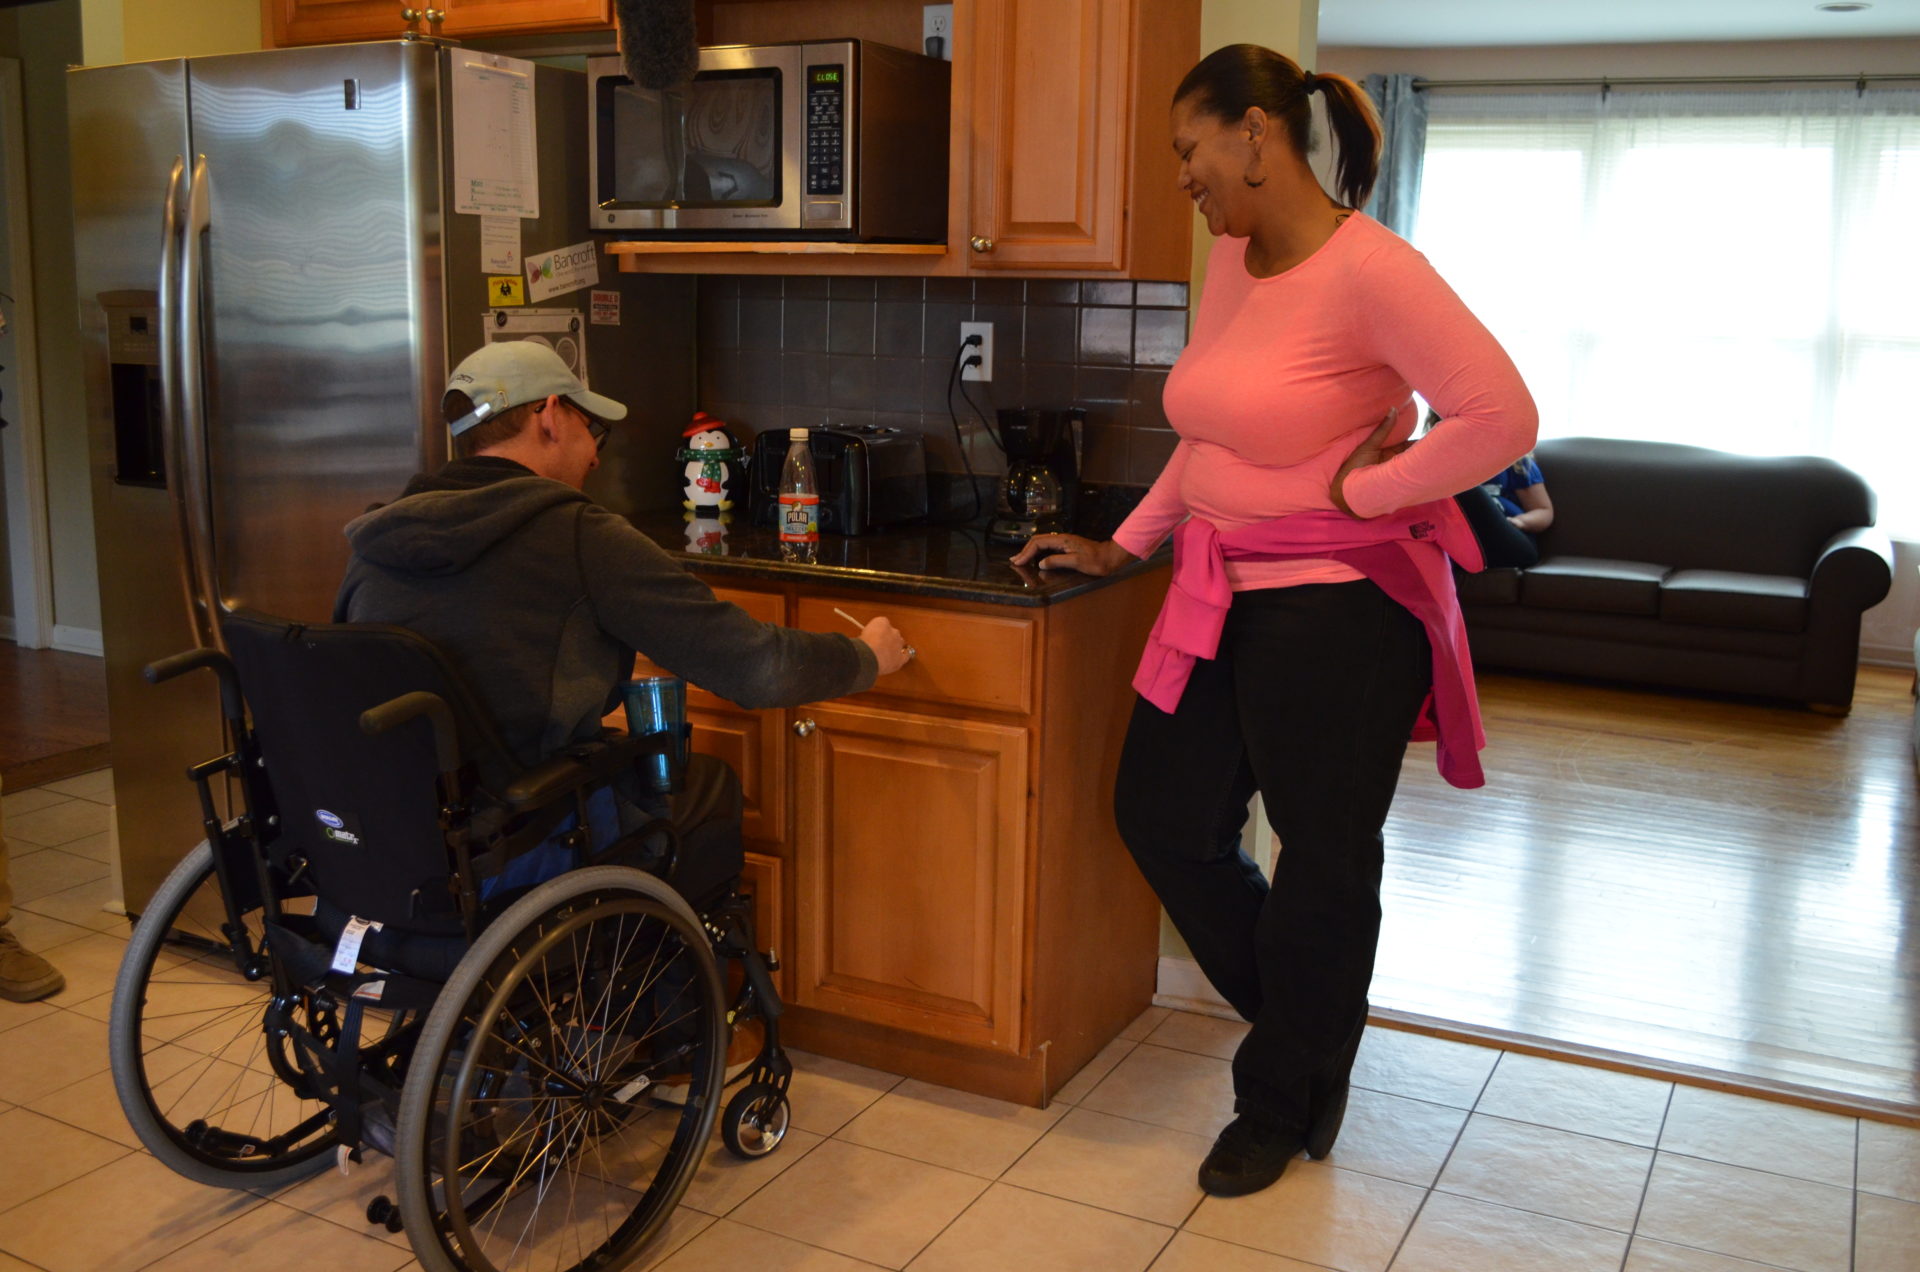 Bancroft NeuroRehab patient sitting in wheelchair on the left with a clinician to his right. They are both by a countertop in the kitchen.